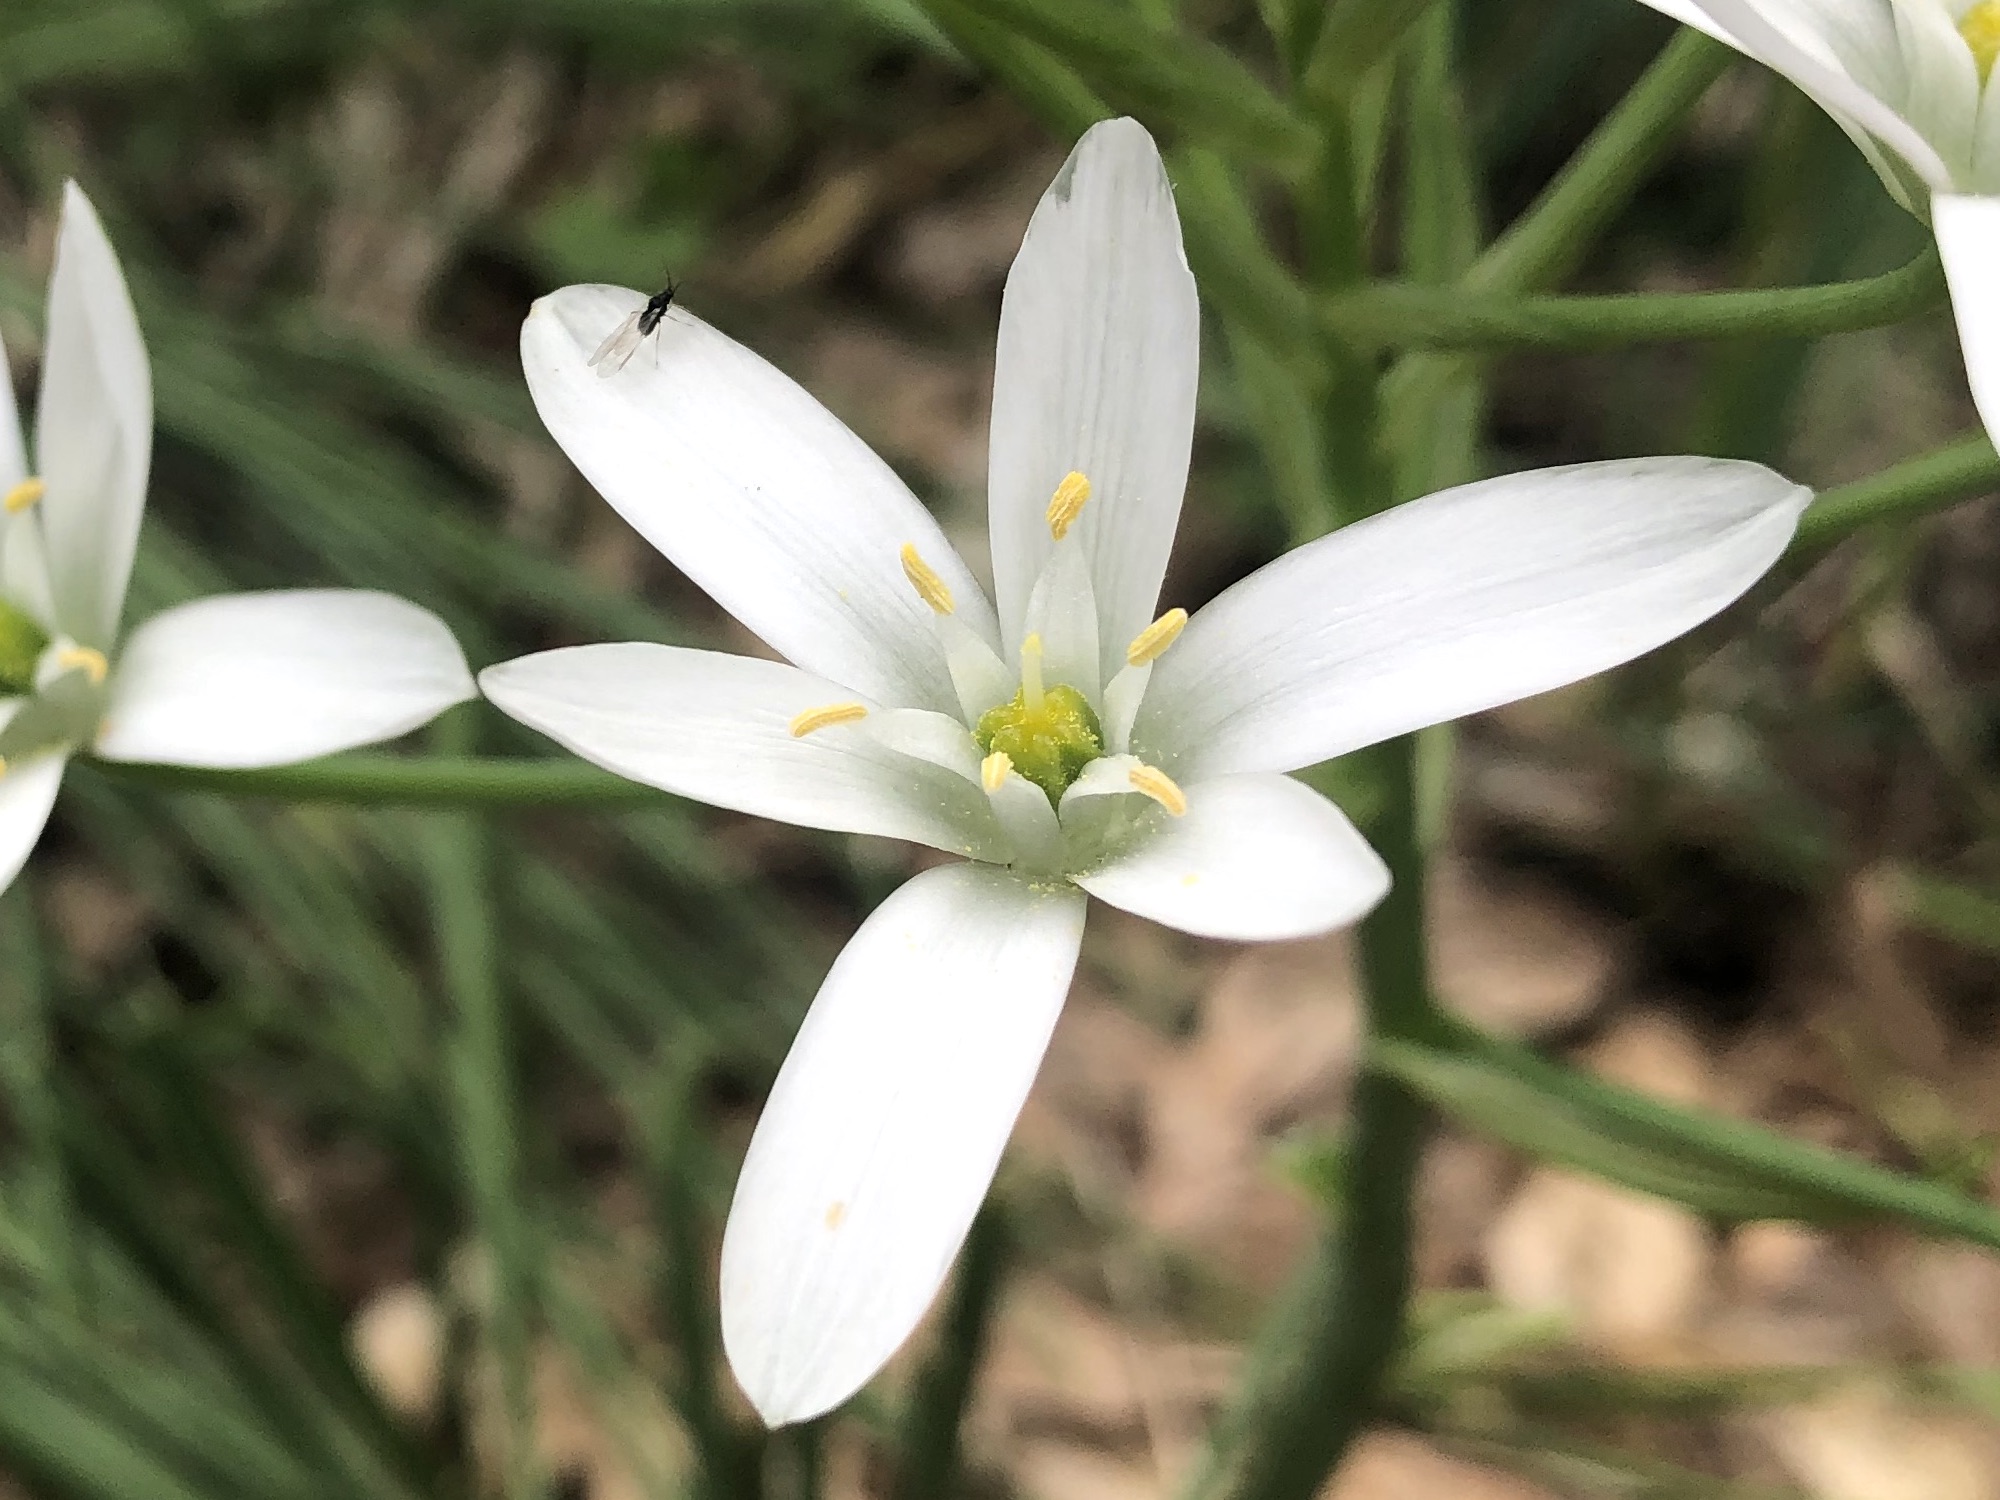 Star-of-Bethlehem along bike path behind Gregory Street in Madison, Wisconsin on May 28, 2022.